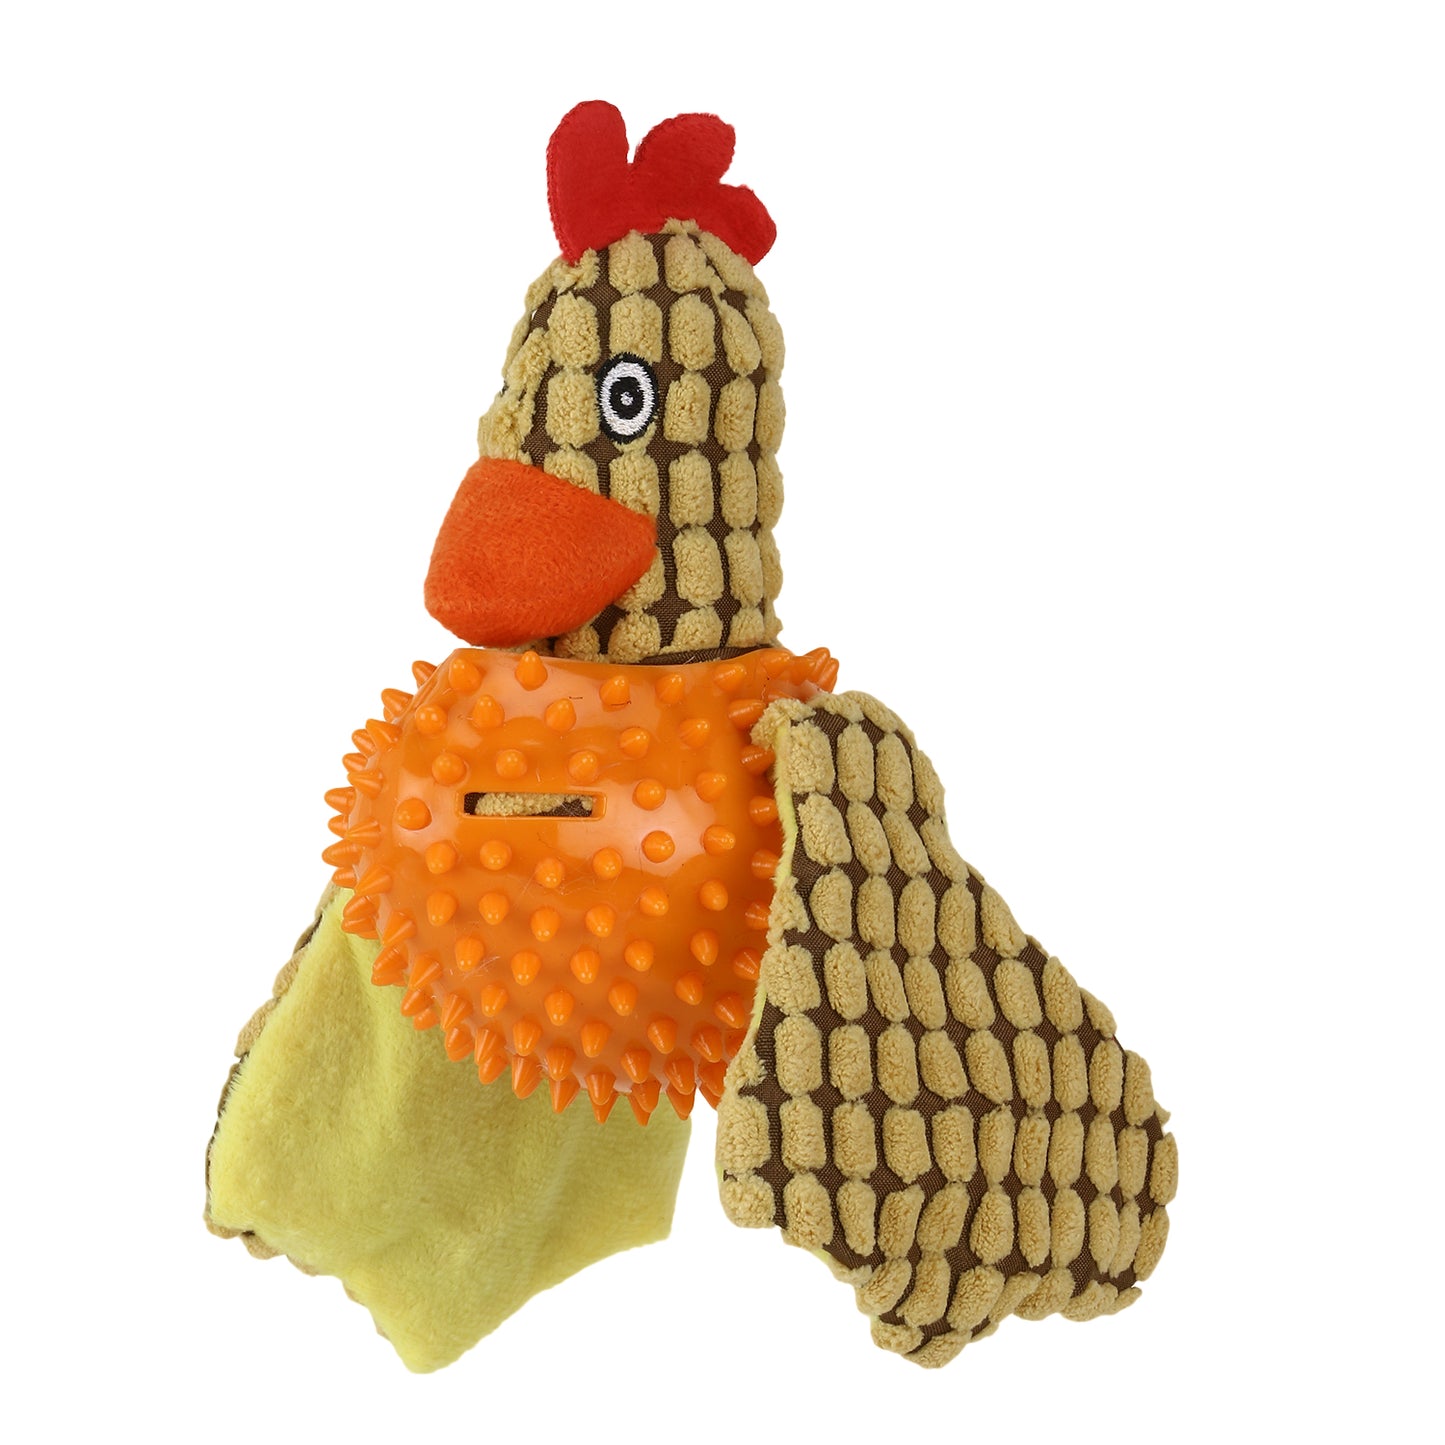 BASIL Bird Plush Pet Toy for Dogs & Puppies with Squeaky Neck (Orange)